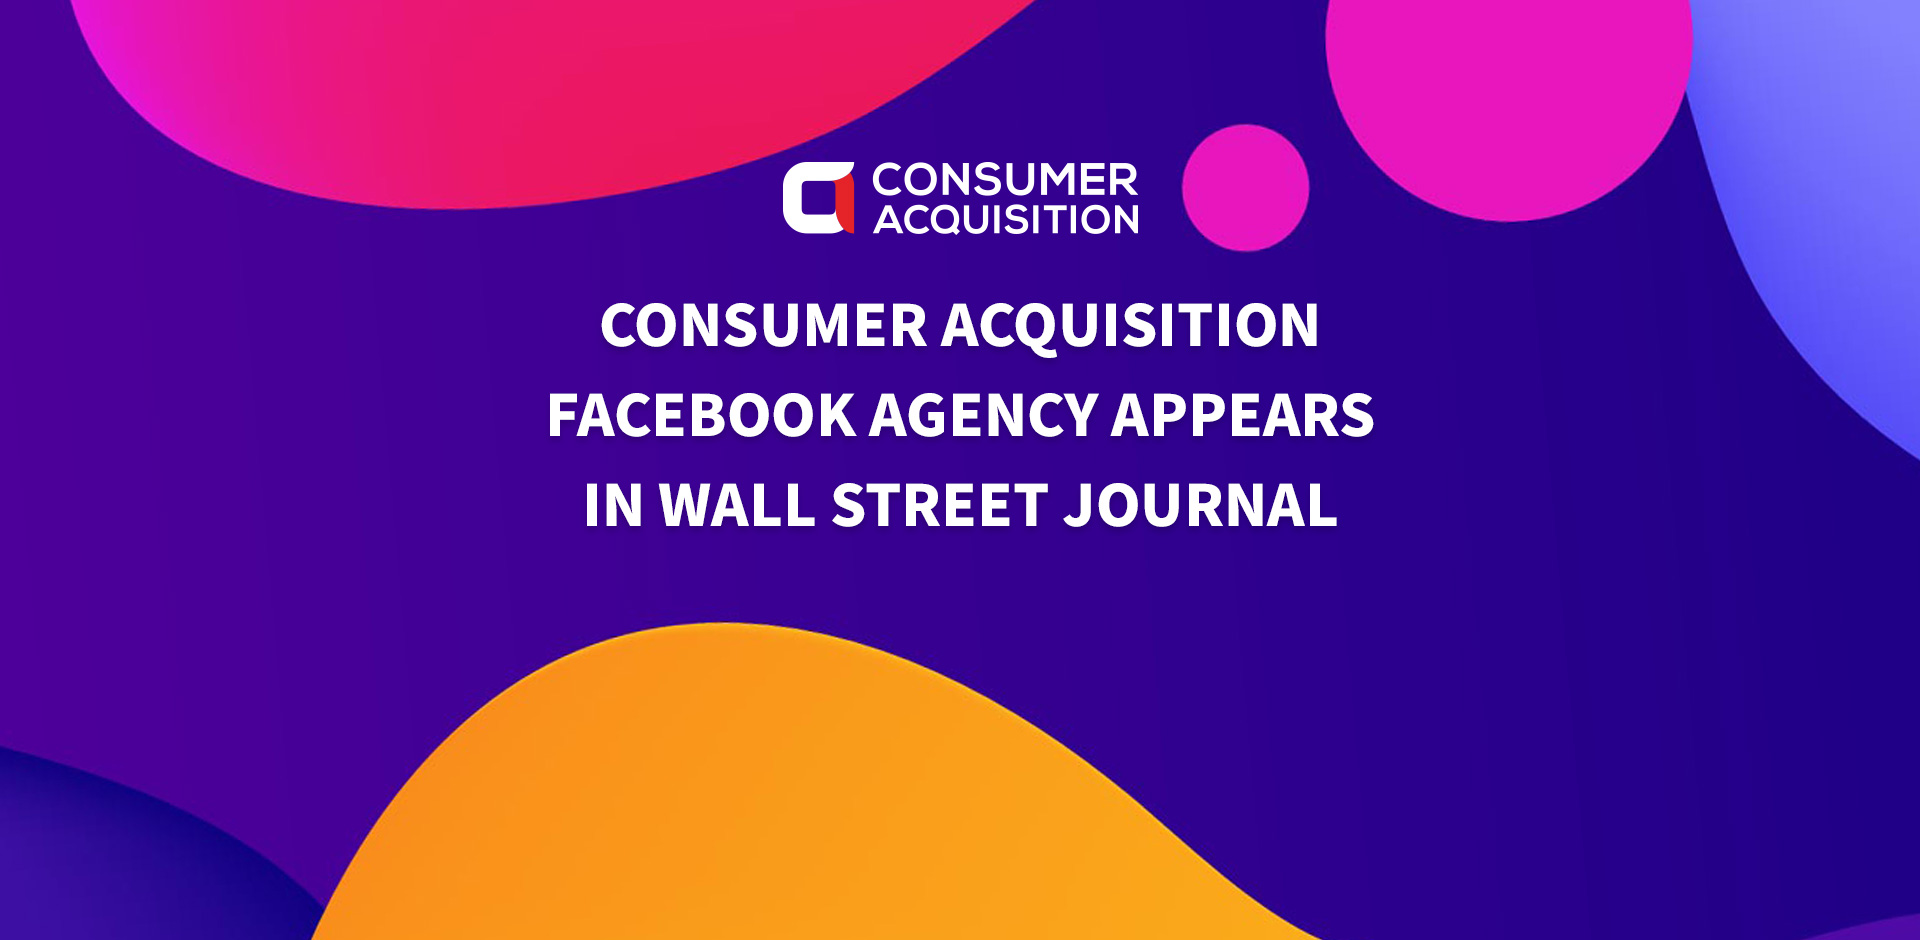 ConsumerAcquisition Facebook Agency Appears in Wall Street Journal